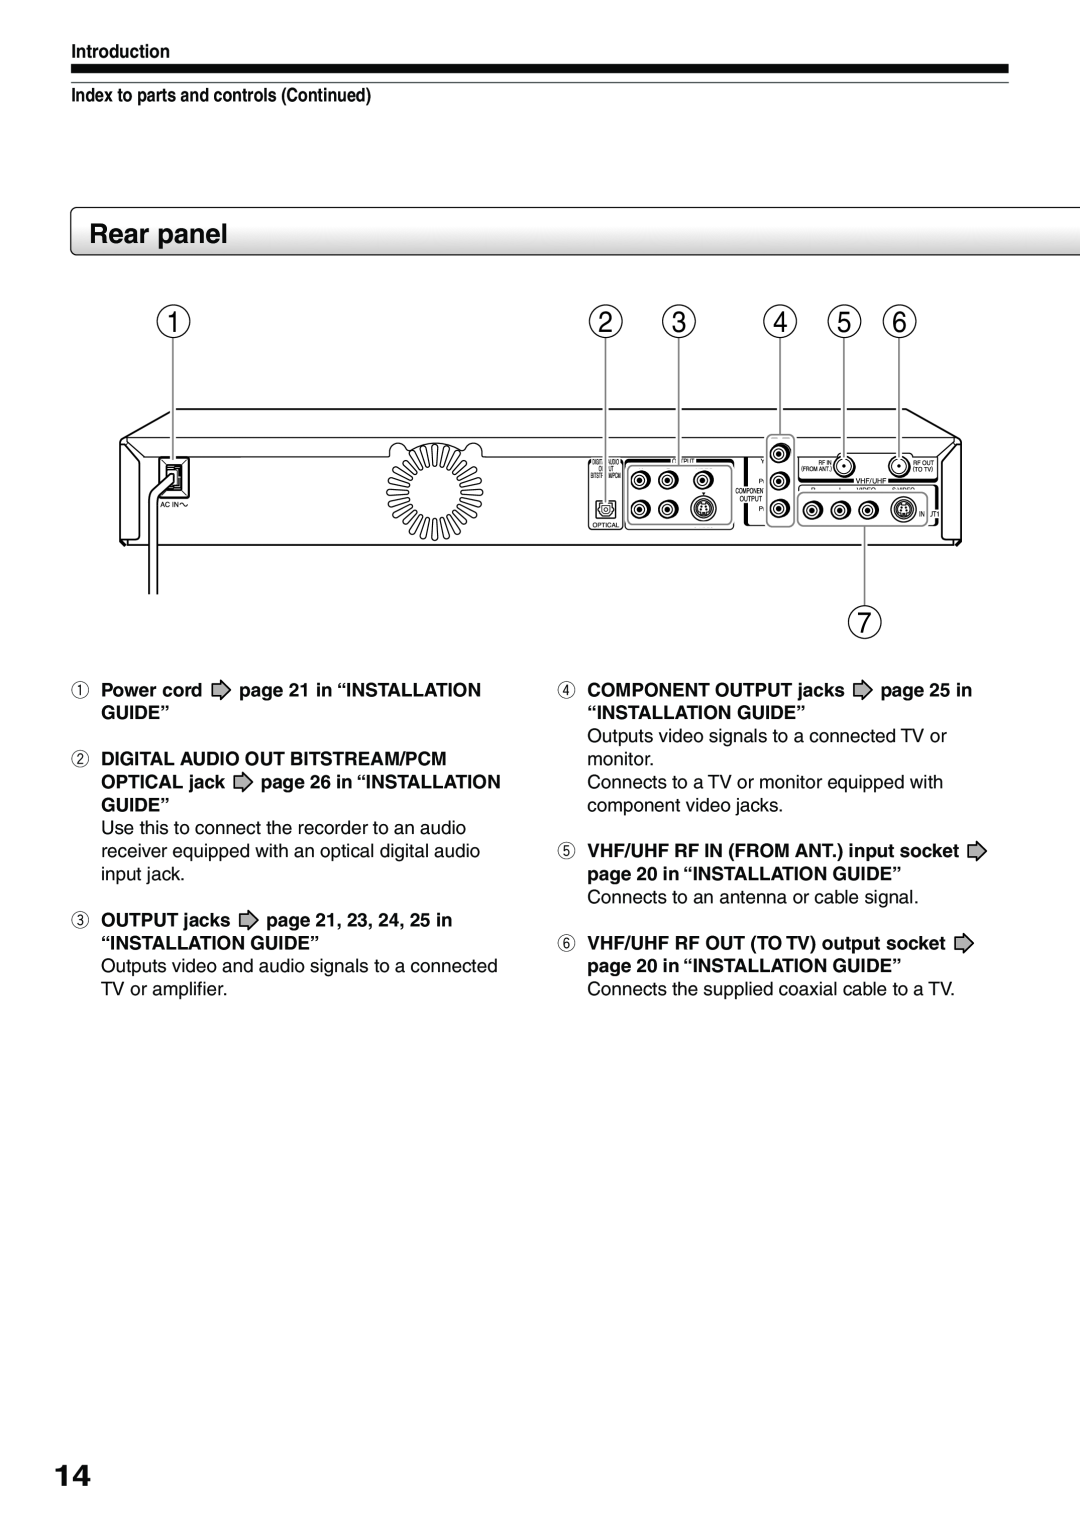 Toshiba D-R4SC, D-KR4SU Rear panel, Index to parts and controls Continued, qPower cord page 21 in “INSTALLATION GUIDE” 